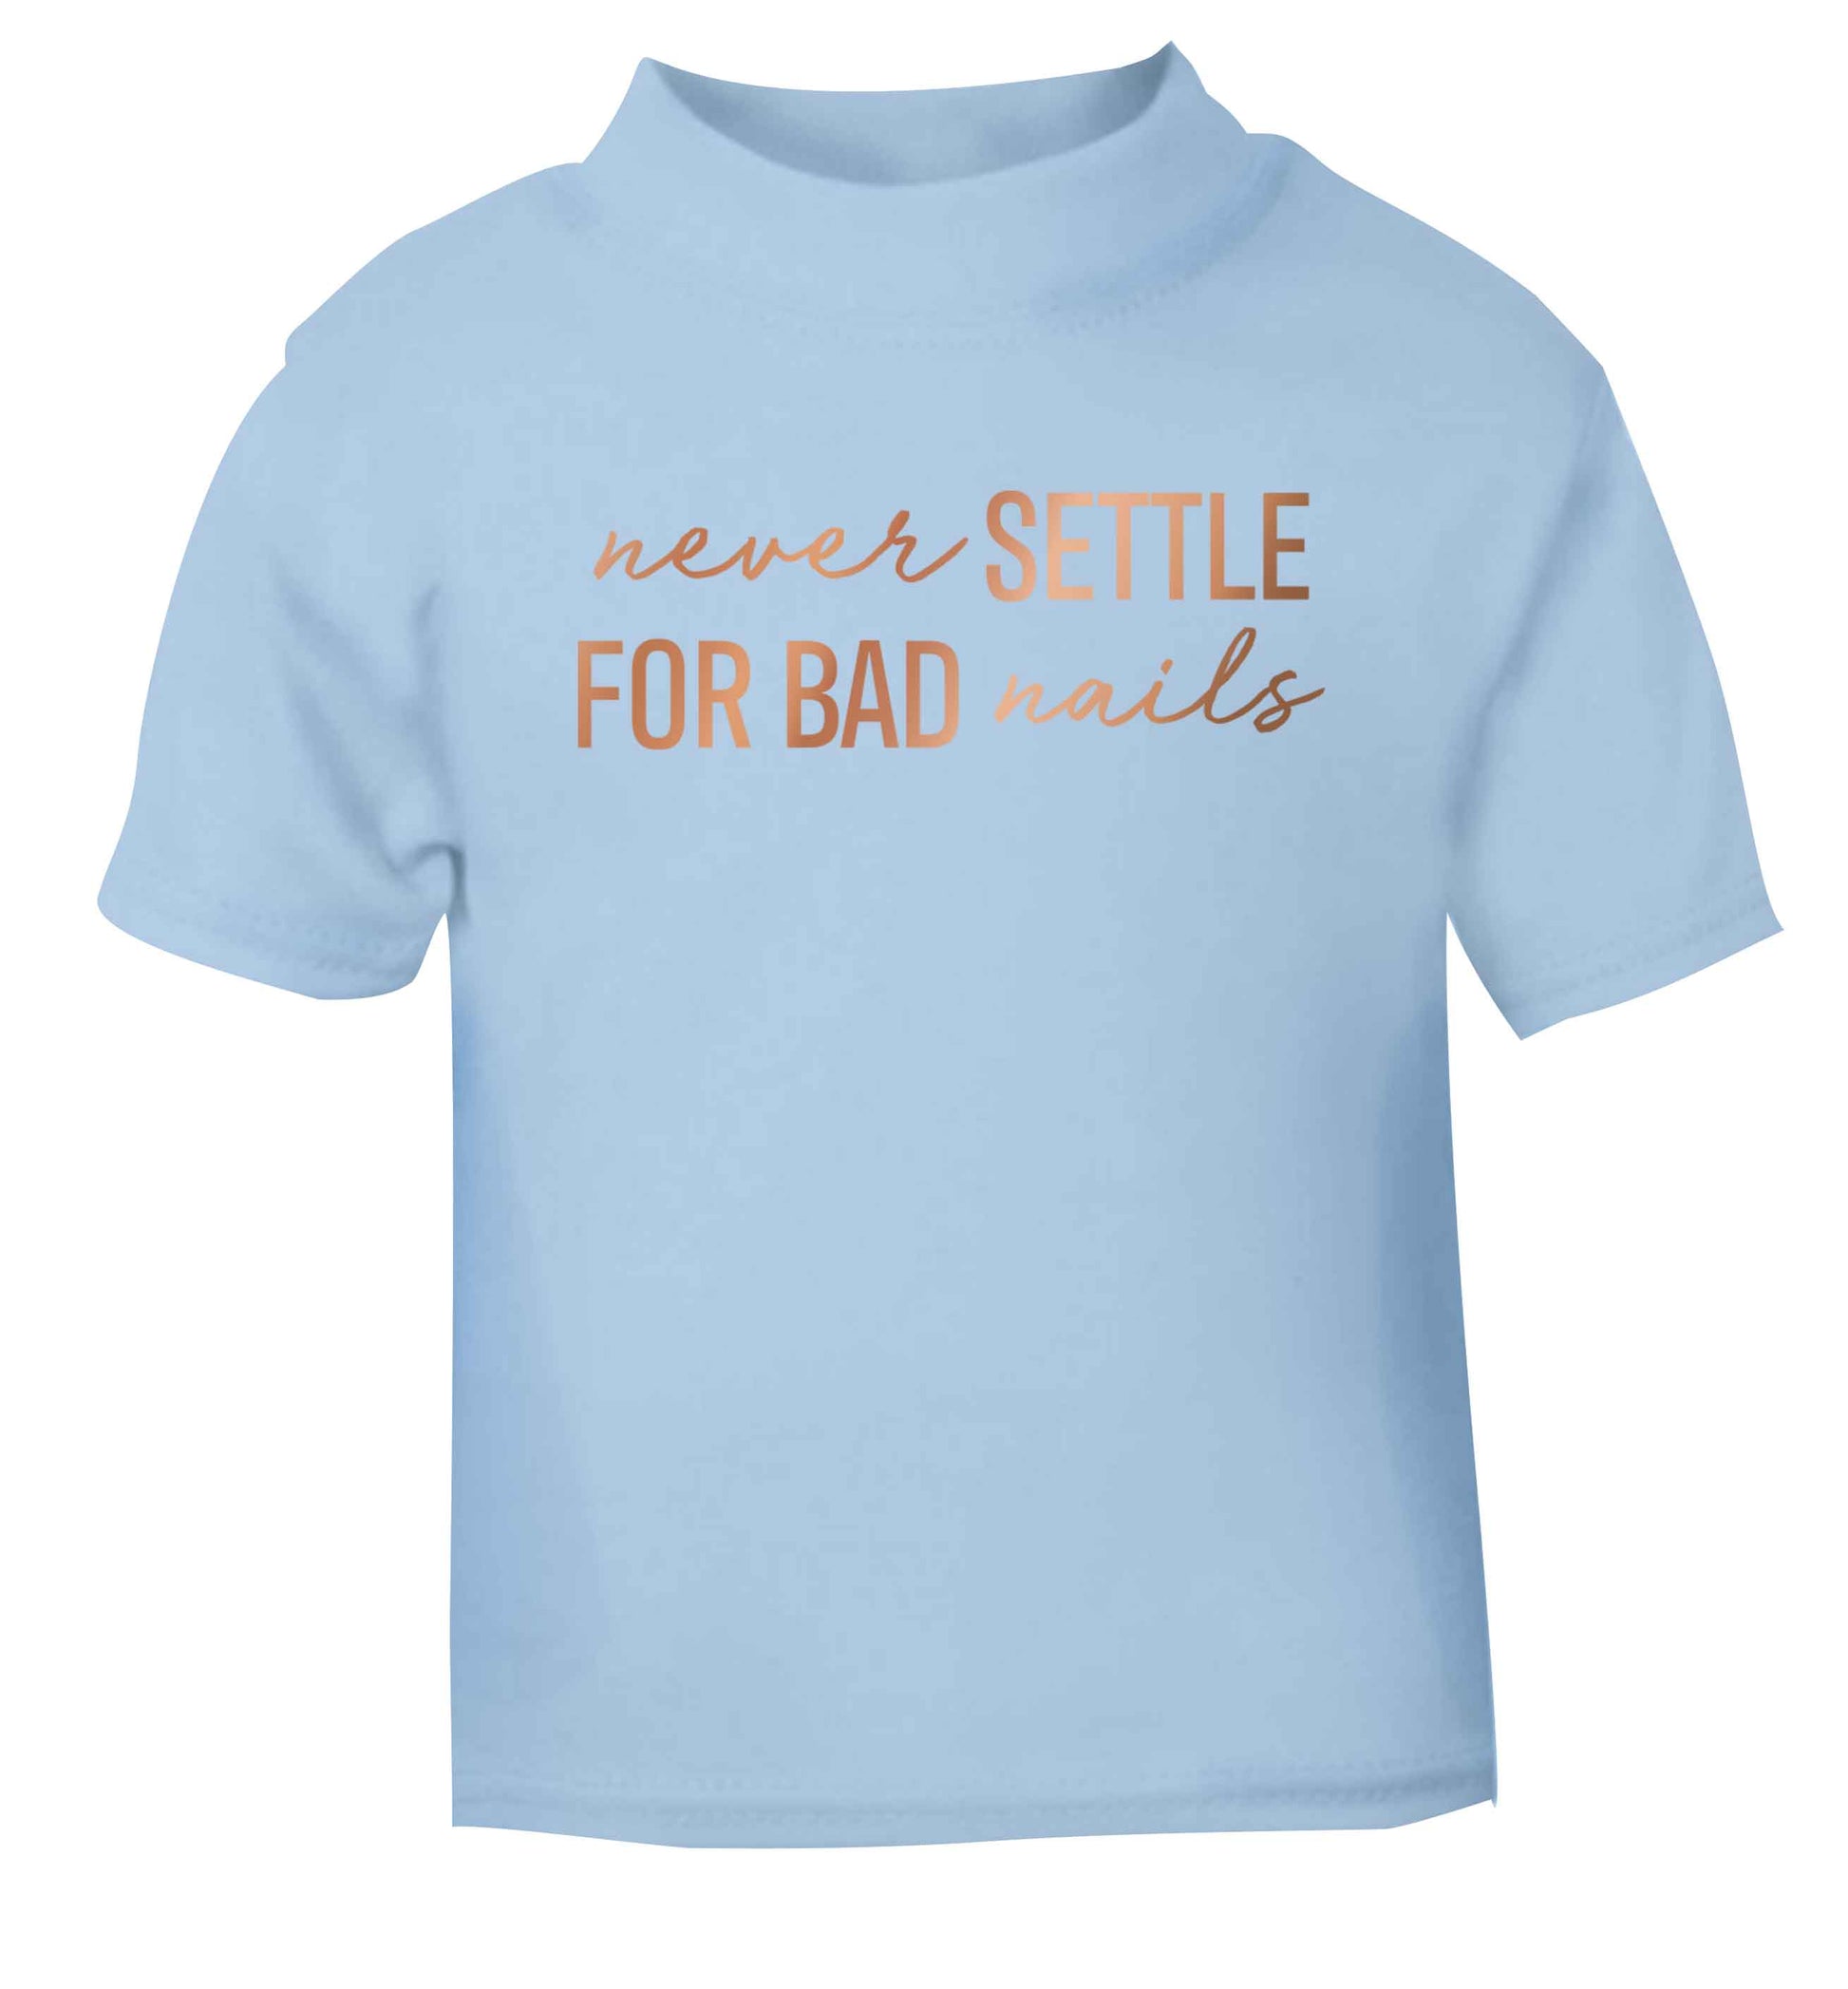 Never settle for bad nails - rose gold light blue baby toddler Tshirt 2 Years